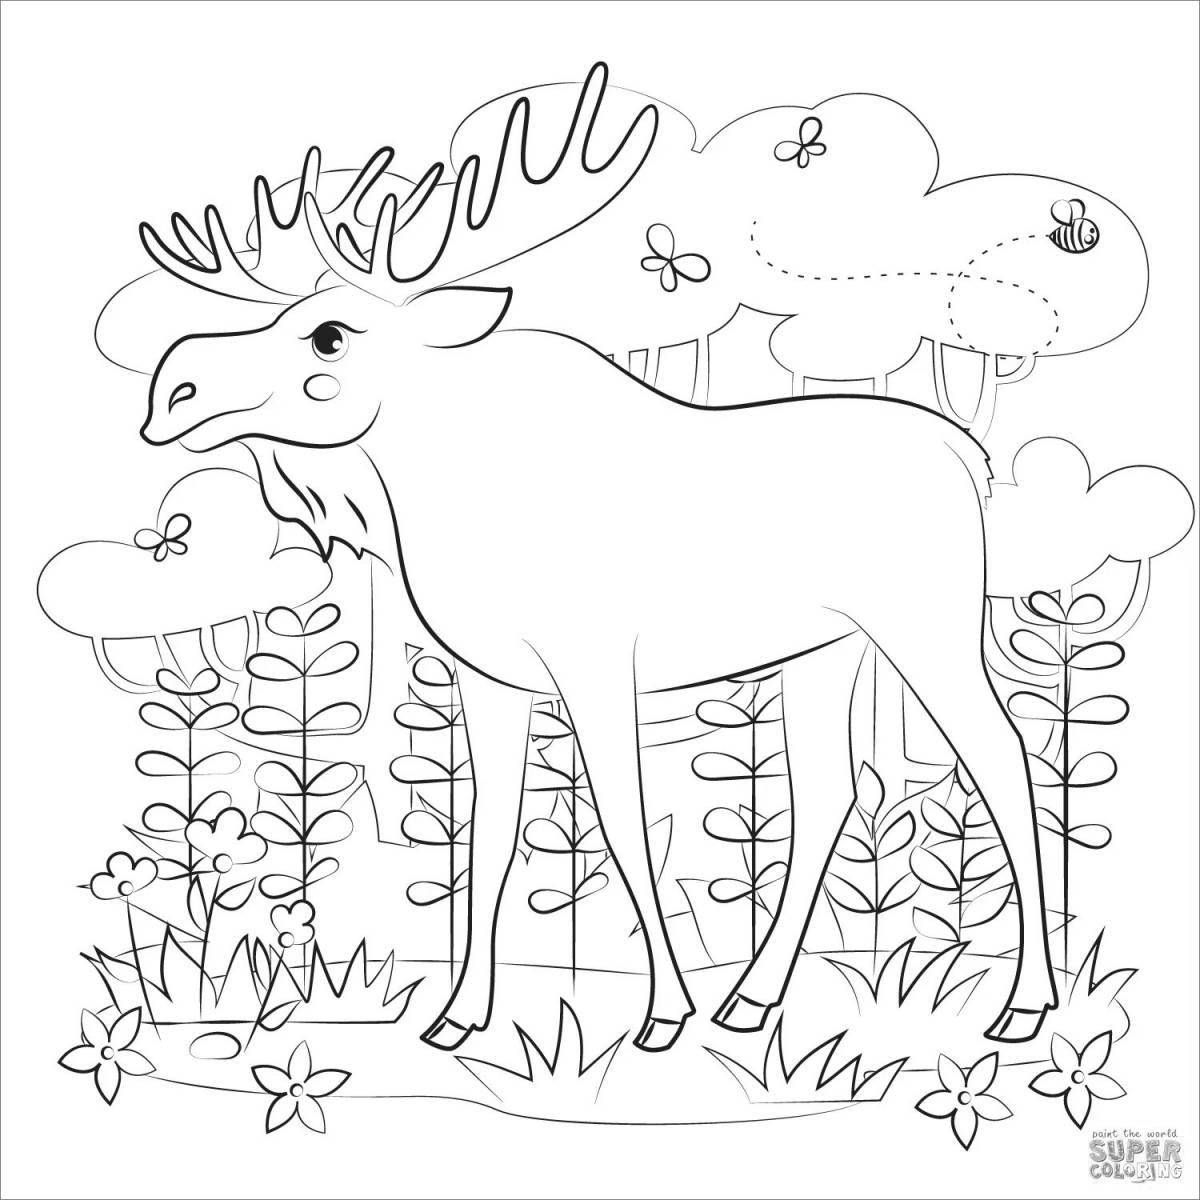 Colorful elk coloring book for children 6-7 years old